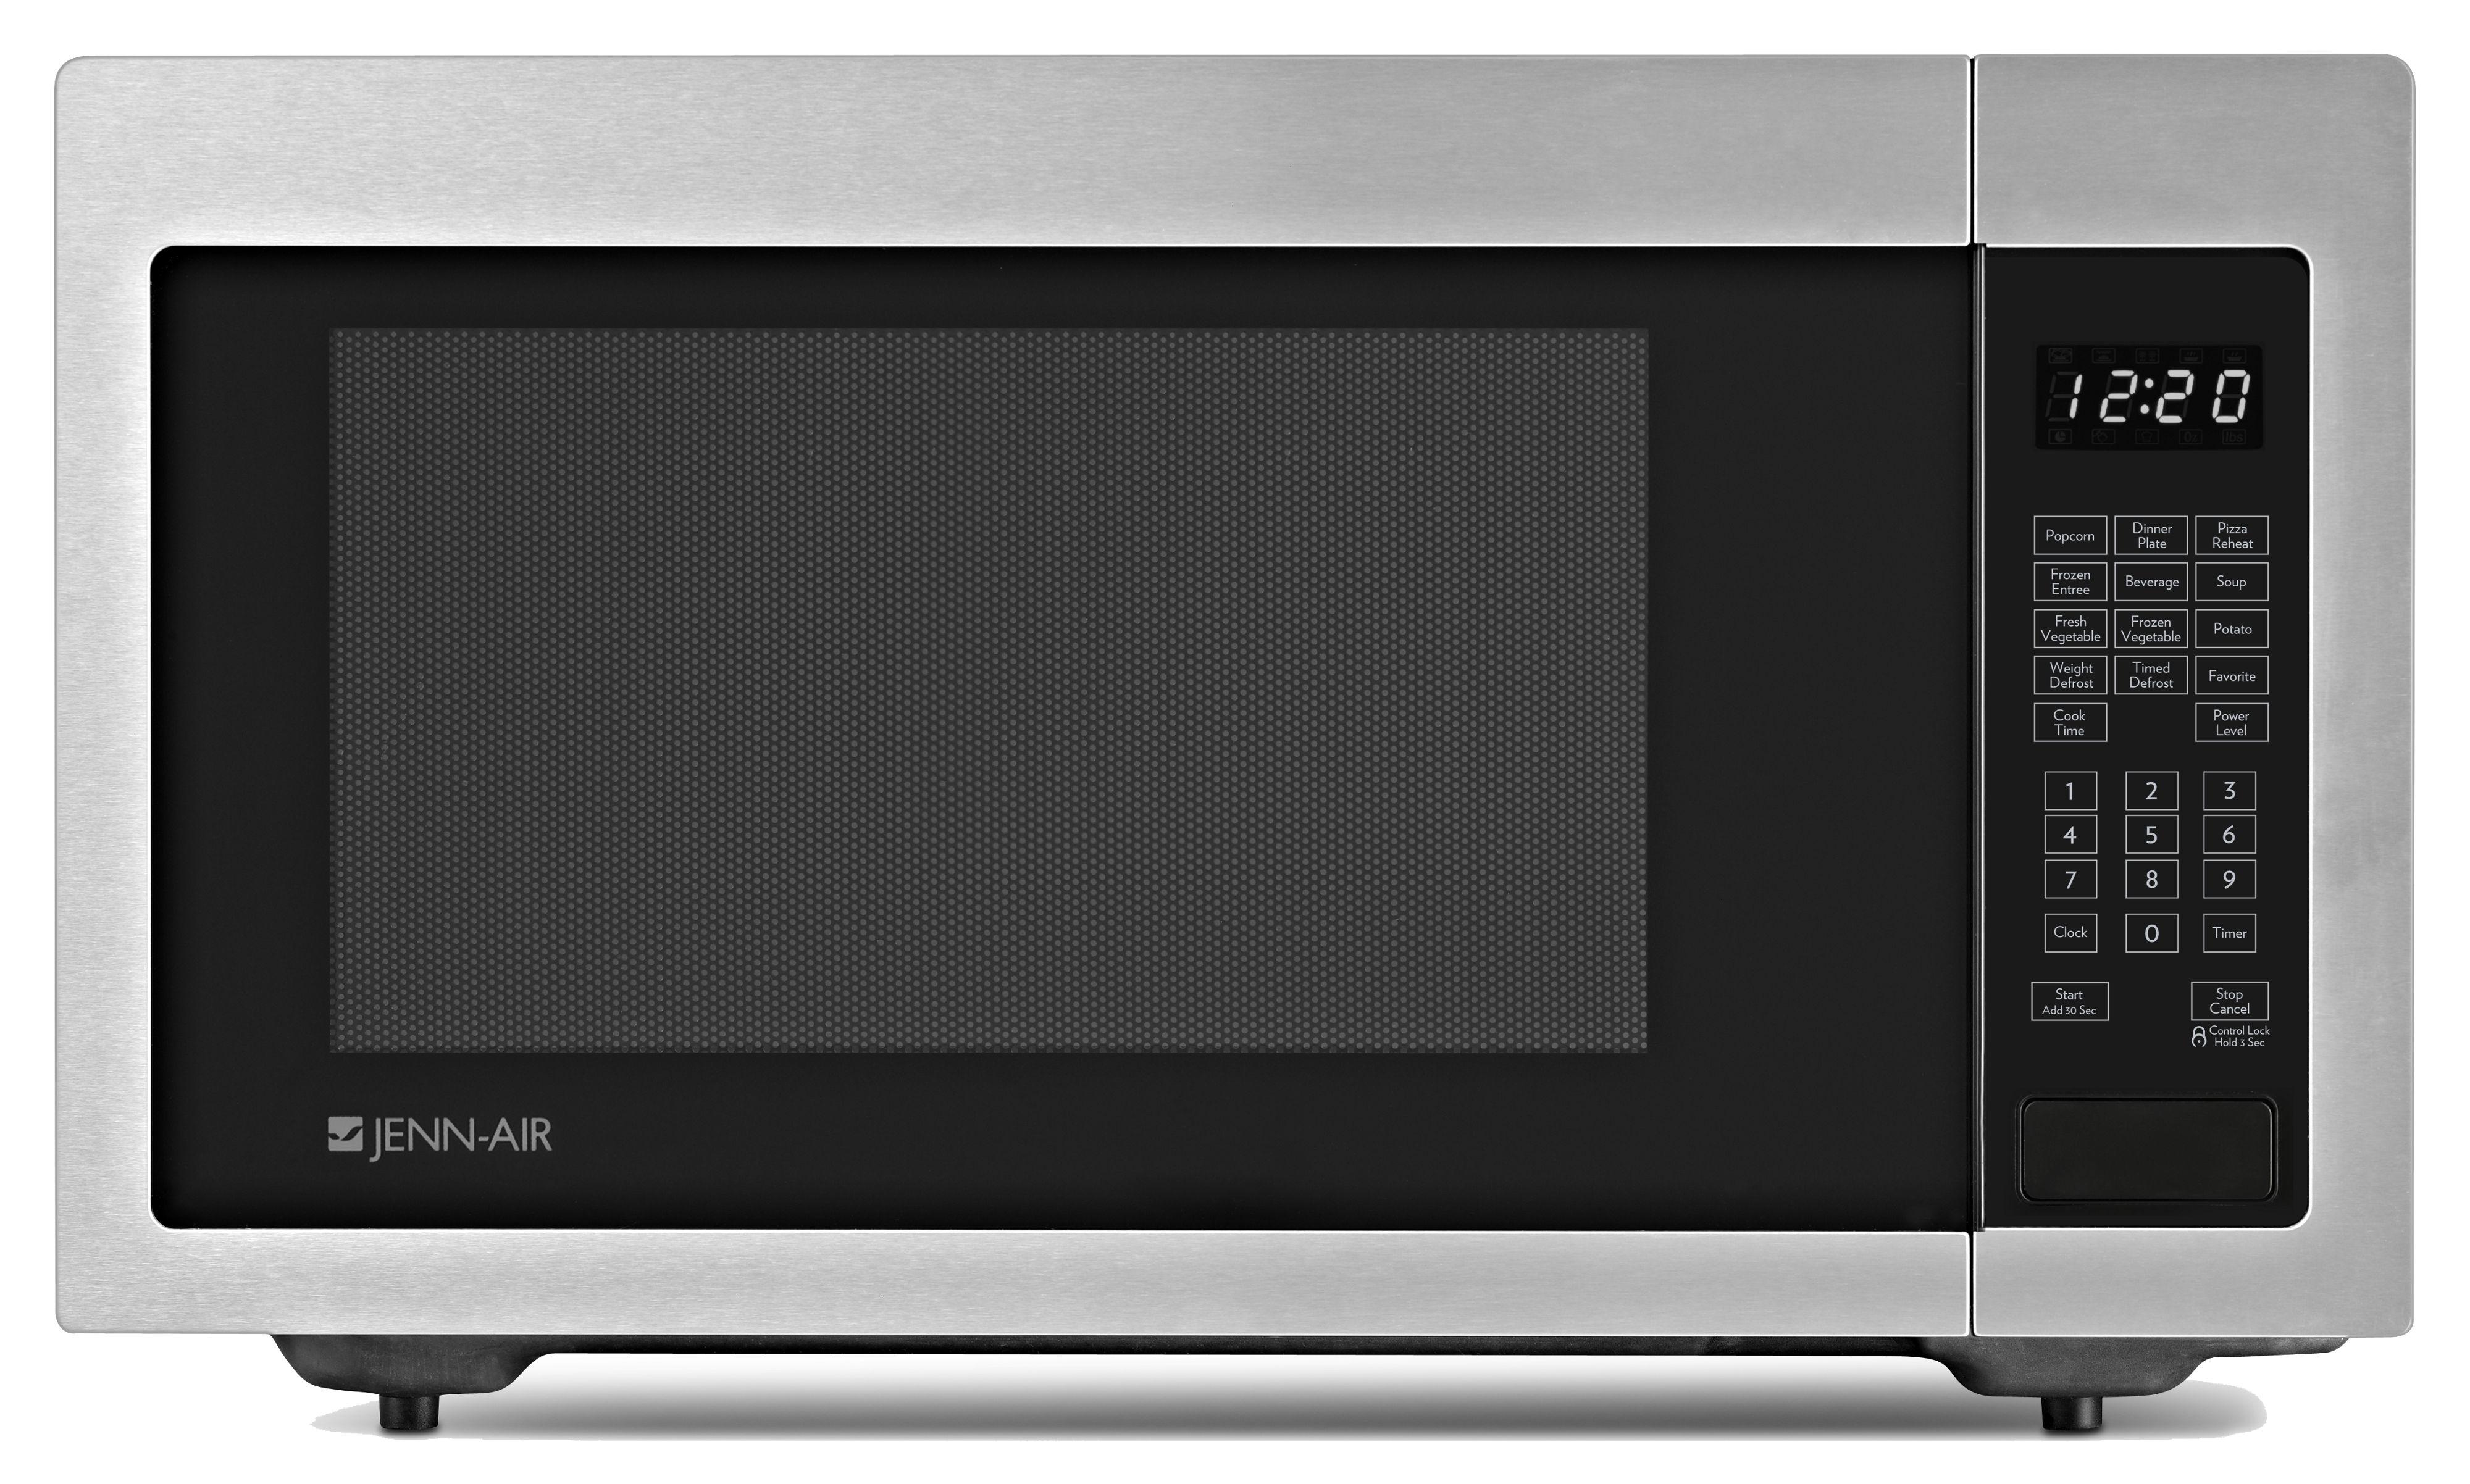 Jenn-air JMC1116AS 22 Inch Built-In Countertop Microwave Oven with 1200